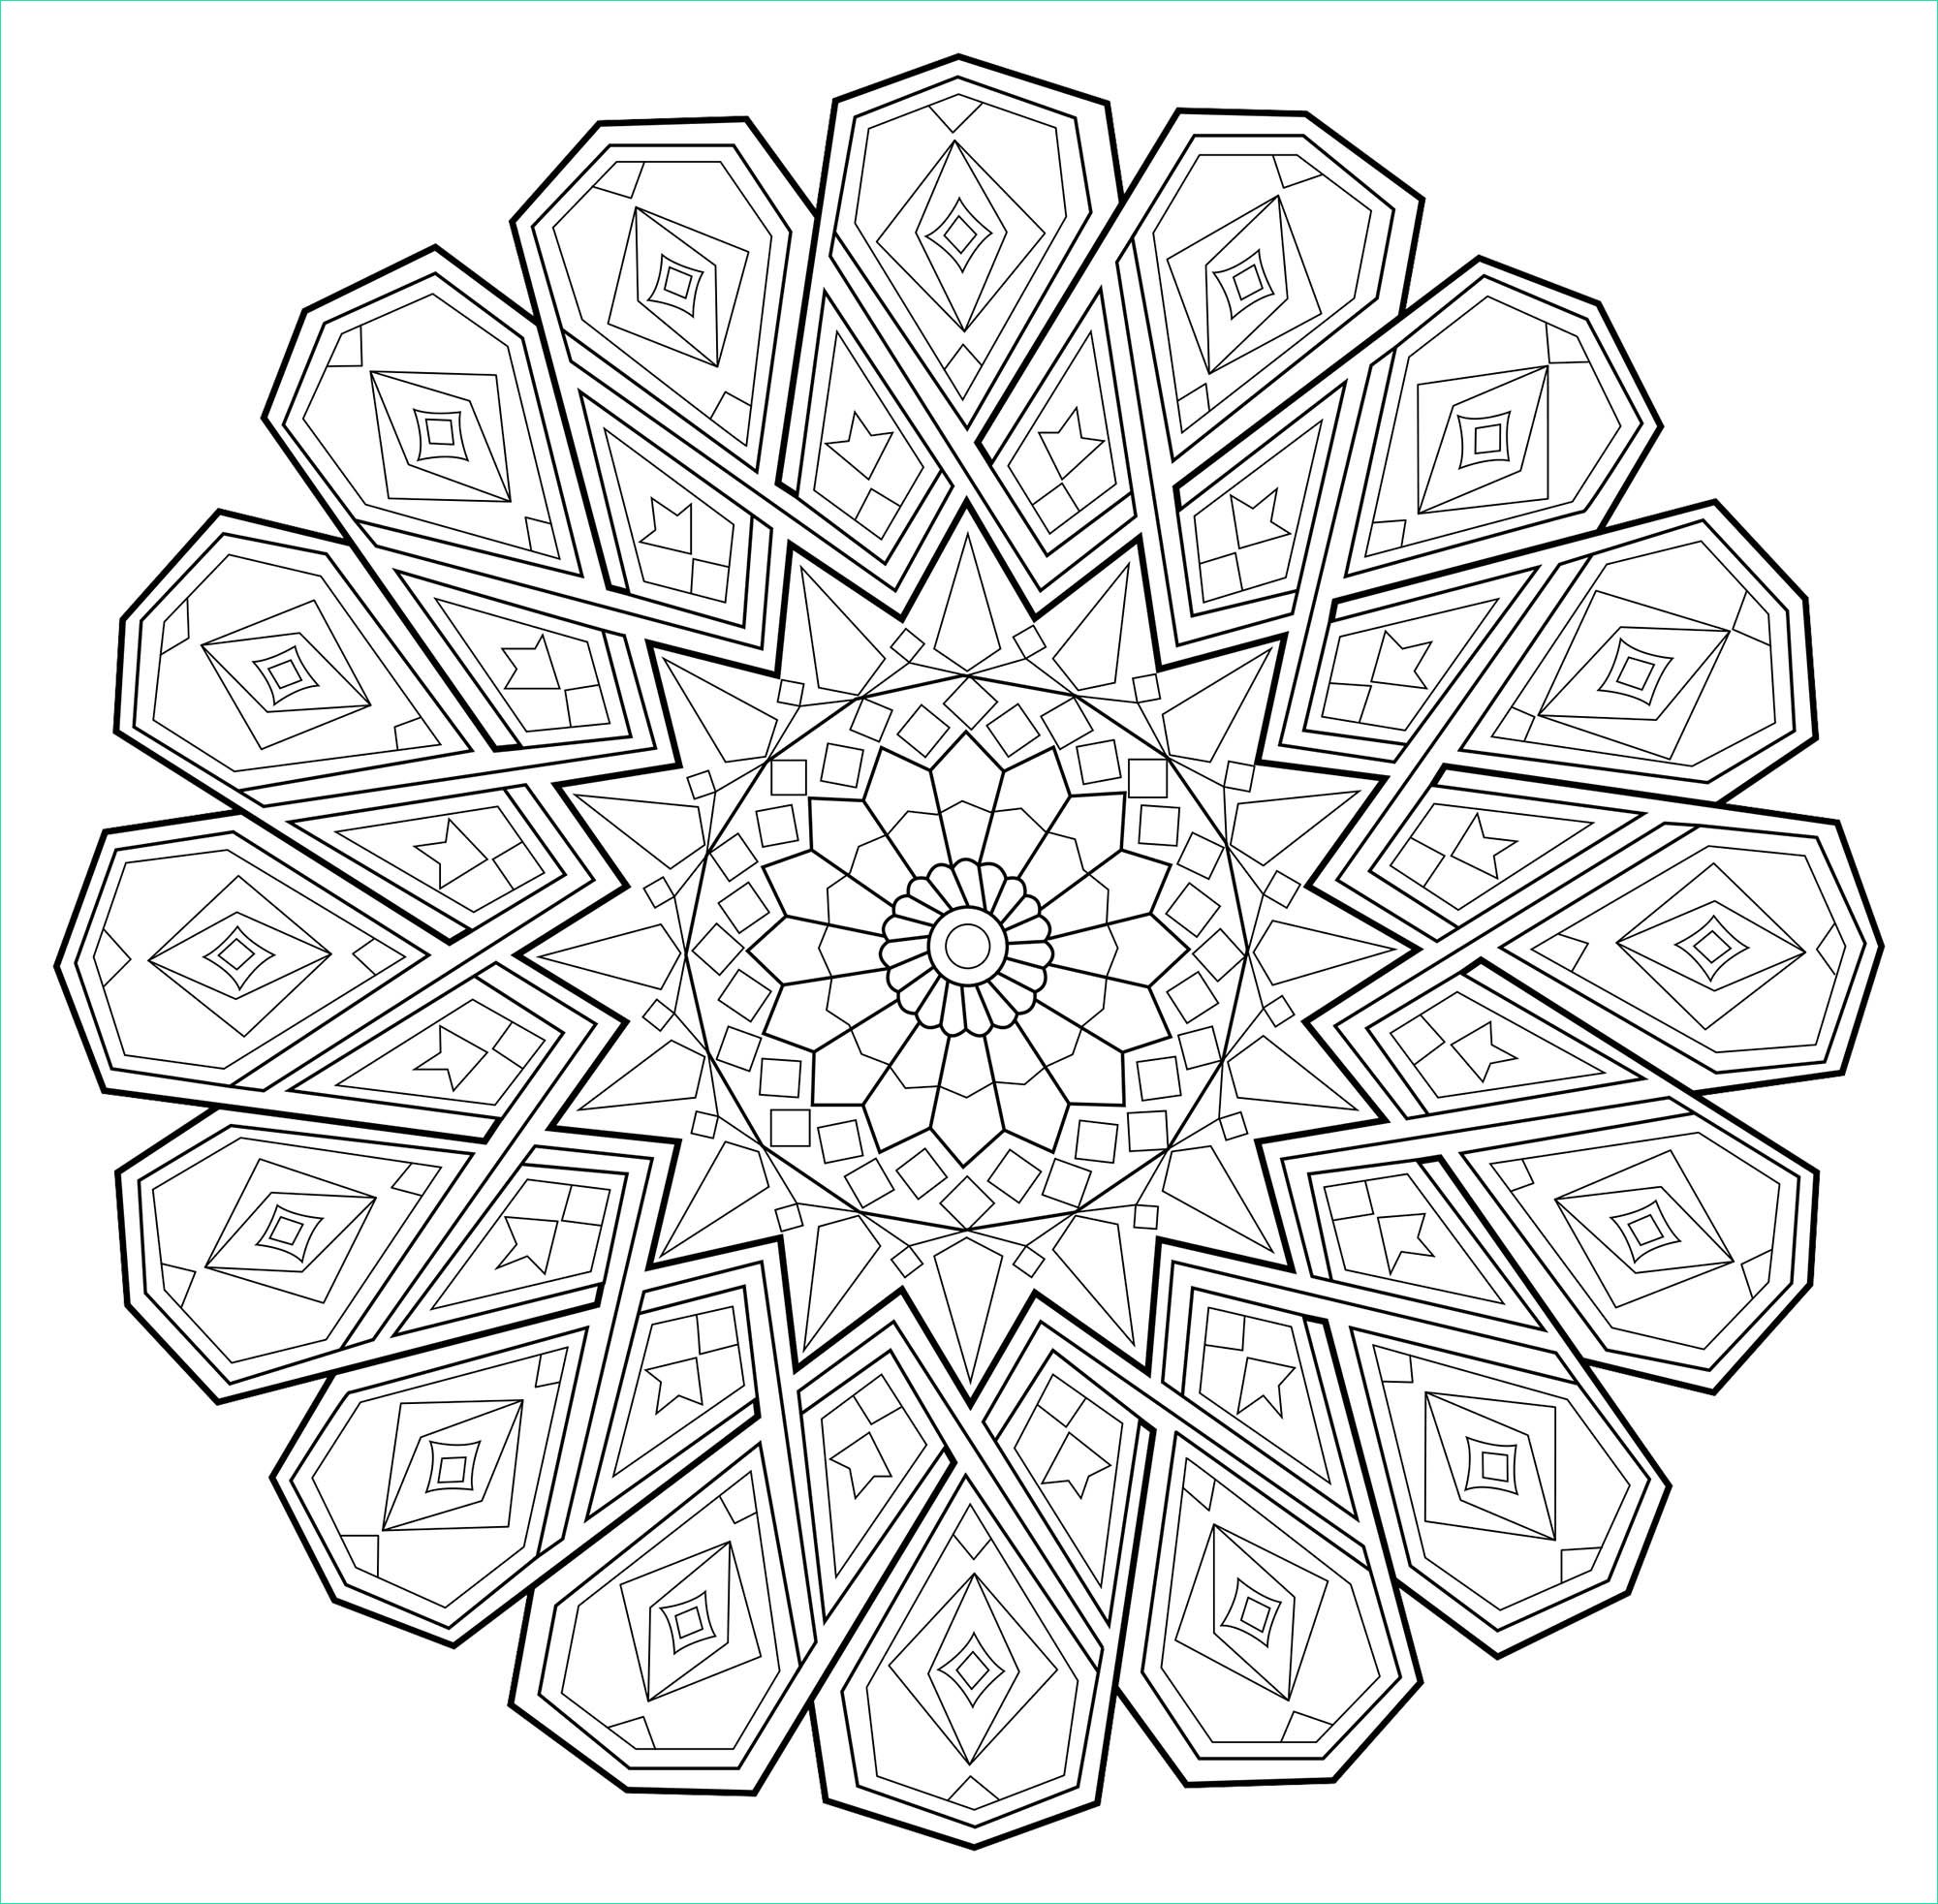 Coloriage Madala Inspirant Collection Relaxing Mandala with Beautiful Patterns Difficult